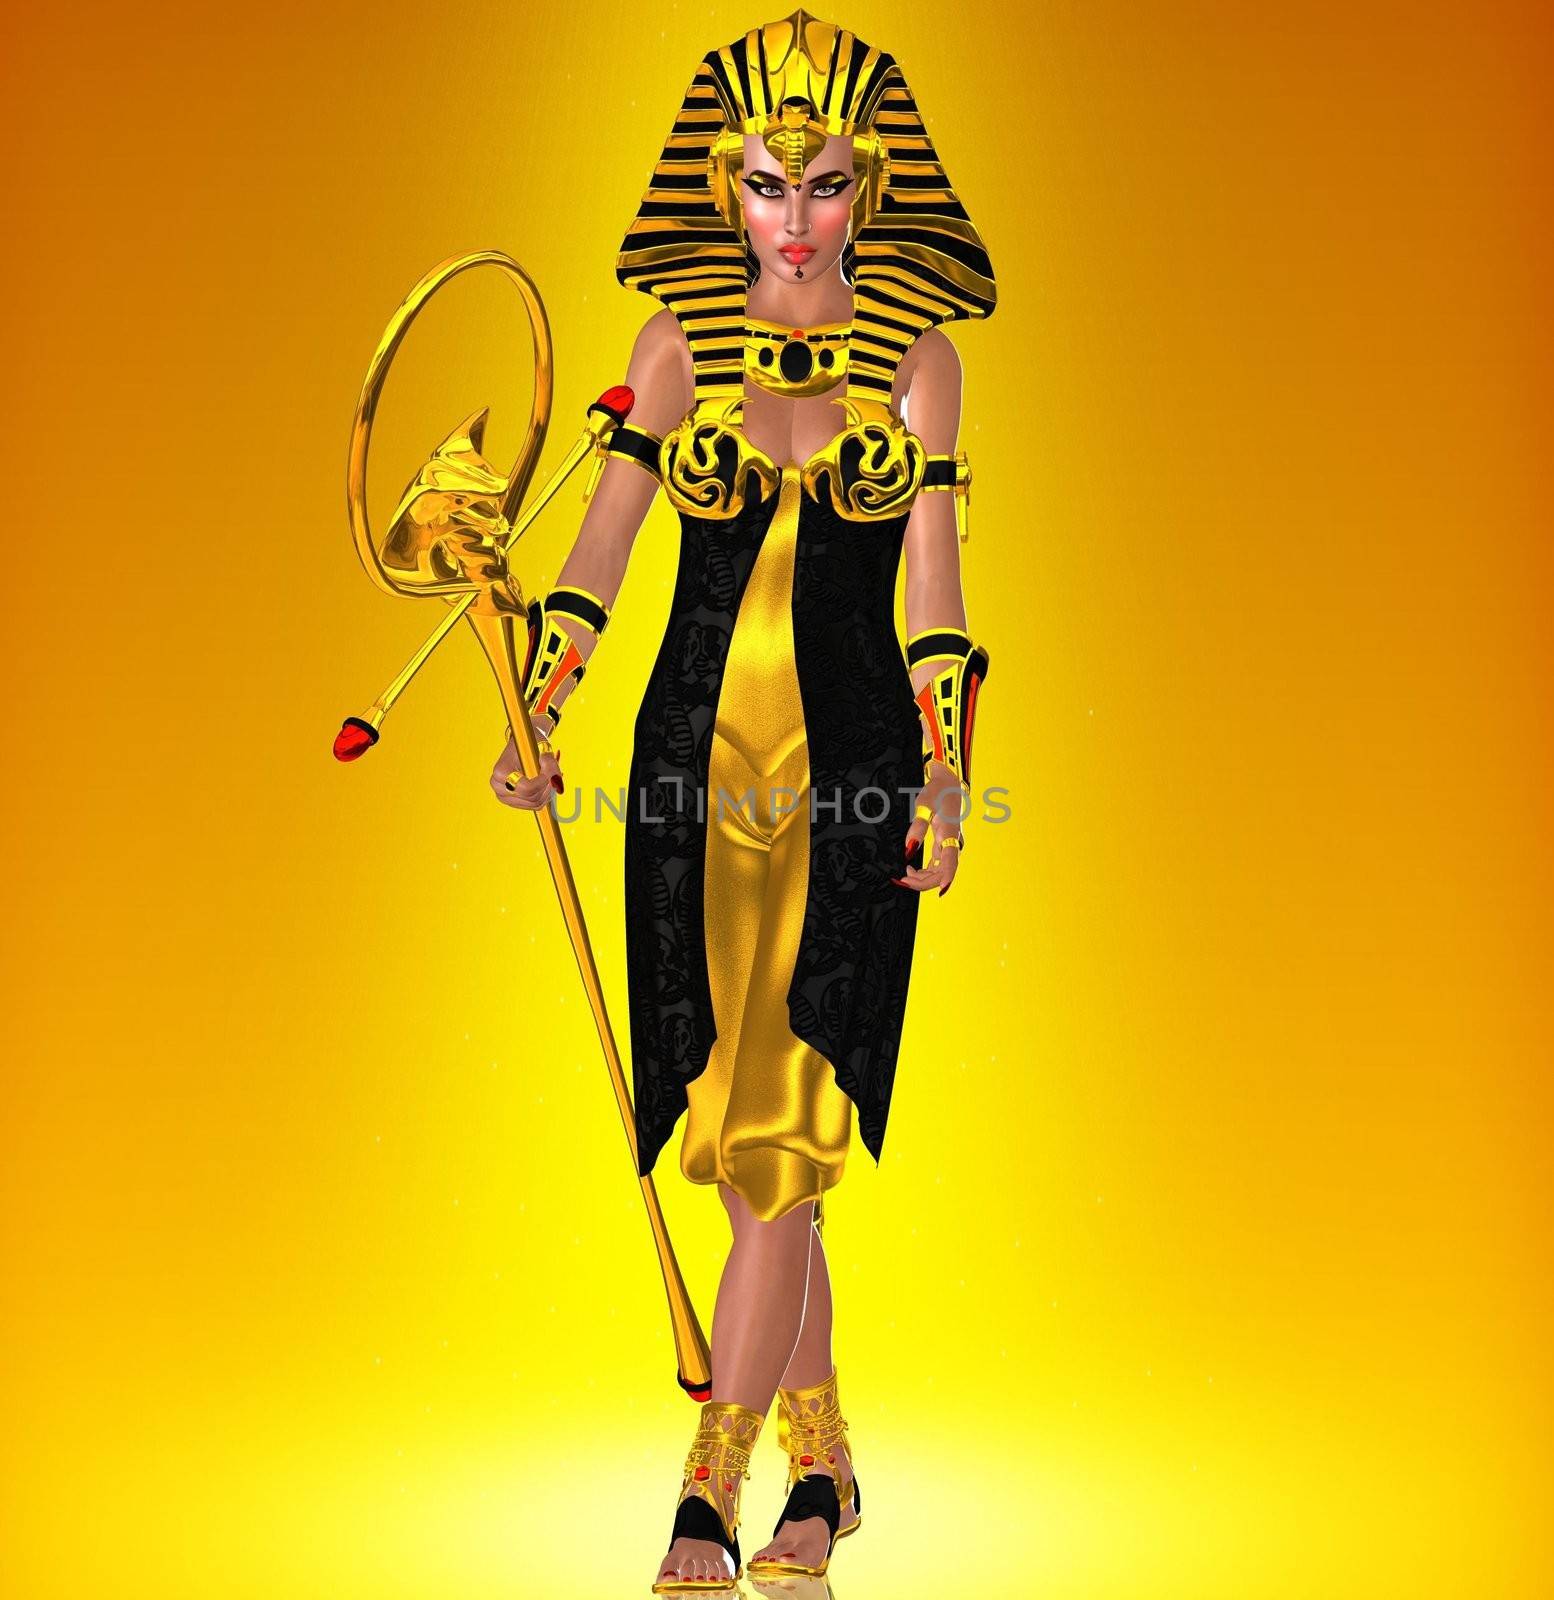 A powerful Egyptian Woman. by TK0920